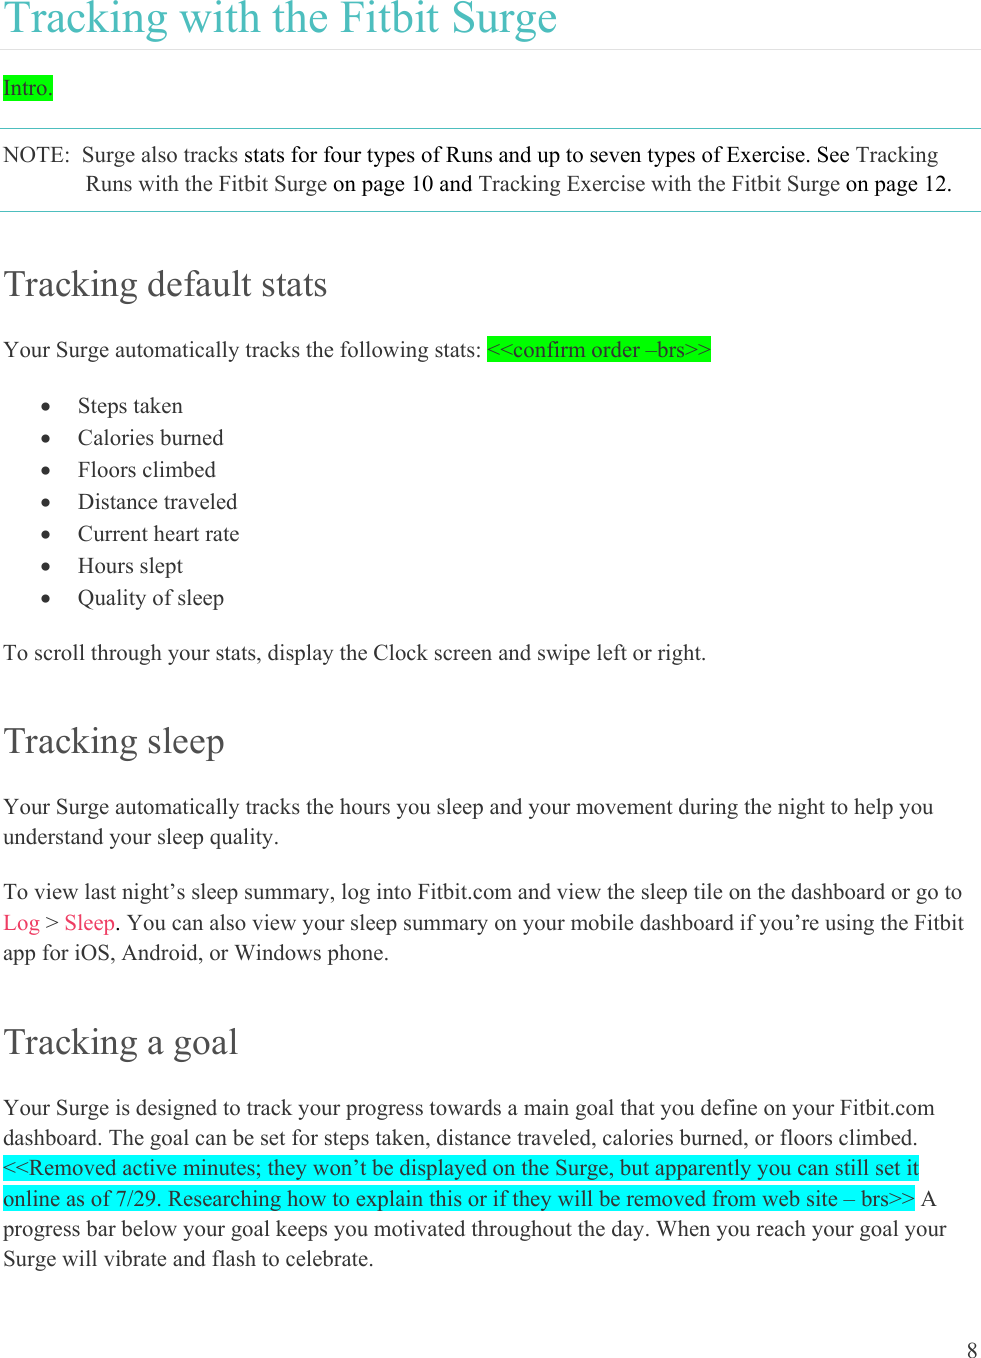 8  Tracking with the Fitbit Surge Intro.    NOTE:  Surge also tracks stats for four types of Runs and up to seven types of Exercise. See Tracking Runs with the Fitbit Surge on page 10 and Tracking Exercise with the Fitbit Surge on page 12. Tracking default stats Your Surge automatically tracks the following stats: &lt;&lt;confirm order –brs&gt;&gt;   Steps taken  Calories burned  Floors climbed  Distance traveled  Current heart rate  Hours slept  Quality of sleep To scroll through your stats, display the Clock screen and swipe left or right. Tracking sleep Your Surge automatically tracks the hours you sleep and your movement during the night to help you understand your sleep quality.  To view last night’s sleep summary, log into Fitbit.com and view the sleep tile on the dashboard or go to Log &gt; Sleep. You can also view your sleep summary on your mobile dashboard if you’re using the Fitbit app for iOS, Android, or Windows phone. Tracking a goal Your Surge is designed to track your progress towards a main goal that you define on your Fitbit.com dashboard. The goal can be set for steps taken, distance traveled, calories burned, or floors climbed. &lt;&lt;Removed active minutes; they won’t be displayed on the Surge, but apparently you can still set it online as of 7/29. Researching how to explain this or if they will be removed from web site – brs&gt;&gt; A progress bar below your goal keeps you motivated throughout the day. When you reach your goal your Surge will vibrate and flash to celebrate.  